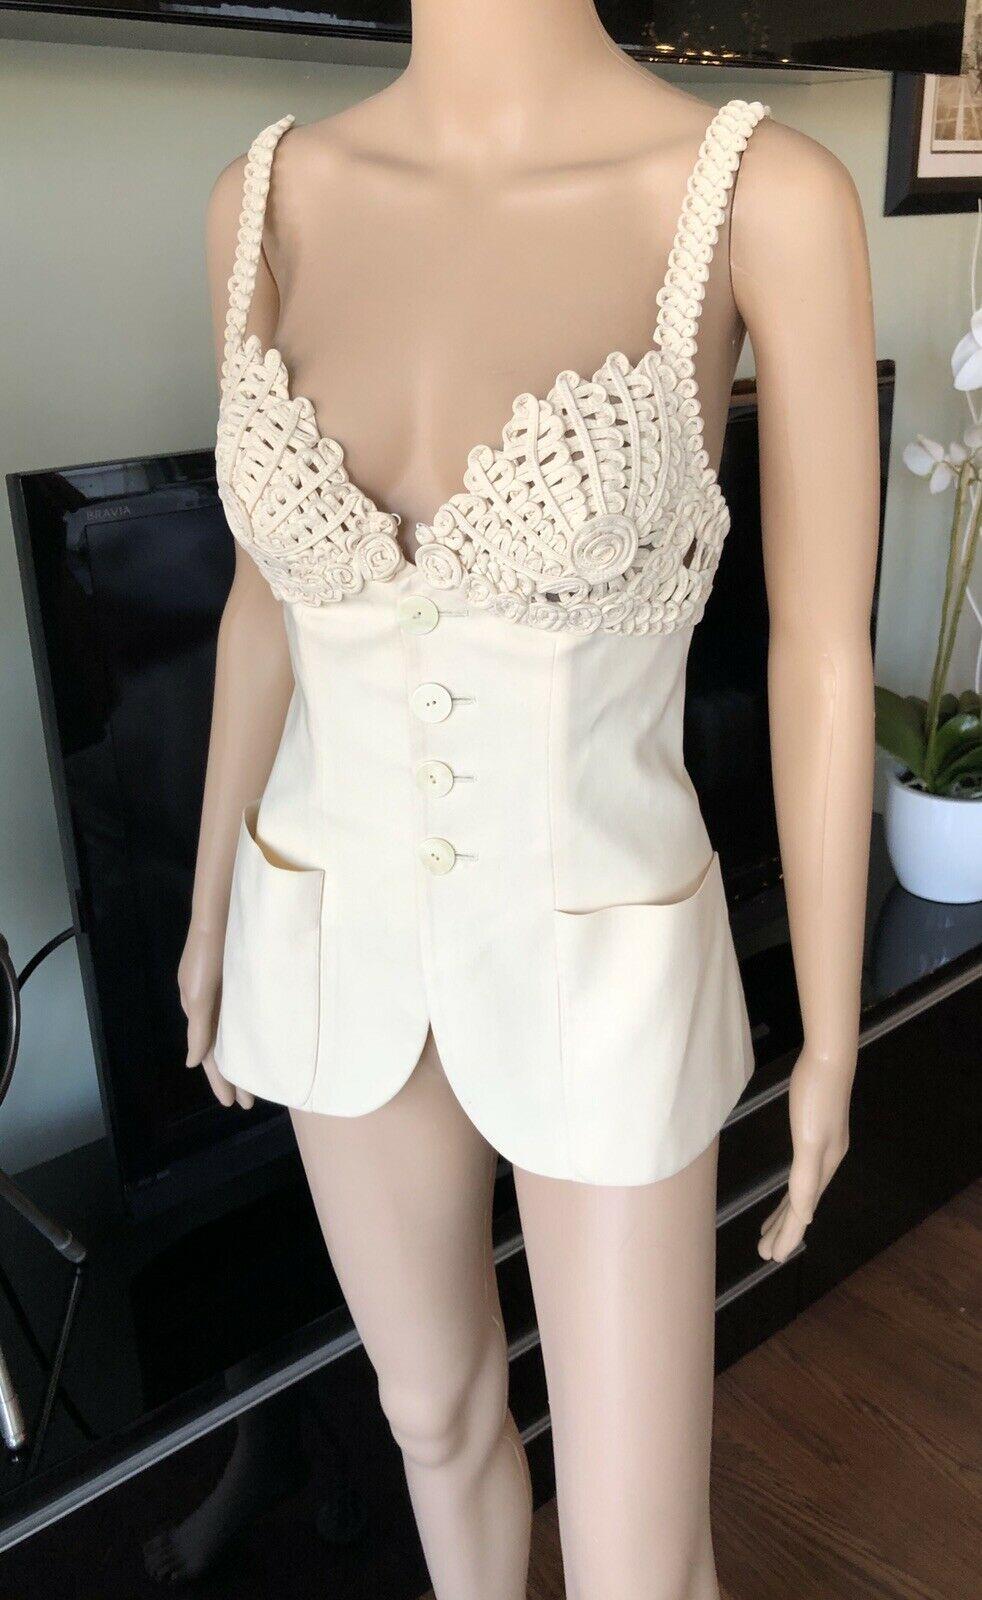 Jean Paul Gaultier S/S 2007 Runway Embroidered Cups Top and Jacket 2 Piece Set IT 38

Creme Jean Paul Gaultier two-piece set. Cropped jacket features structured shoulders and open front. Sleeveless top features dual pockets and button closures at